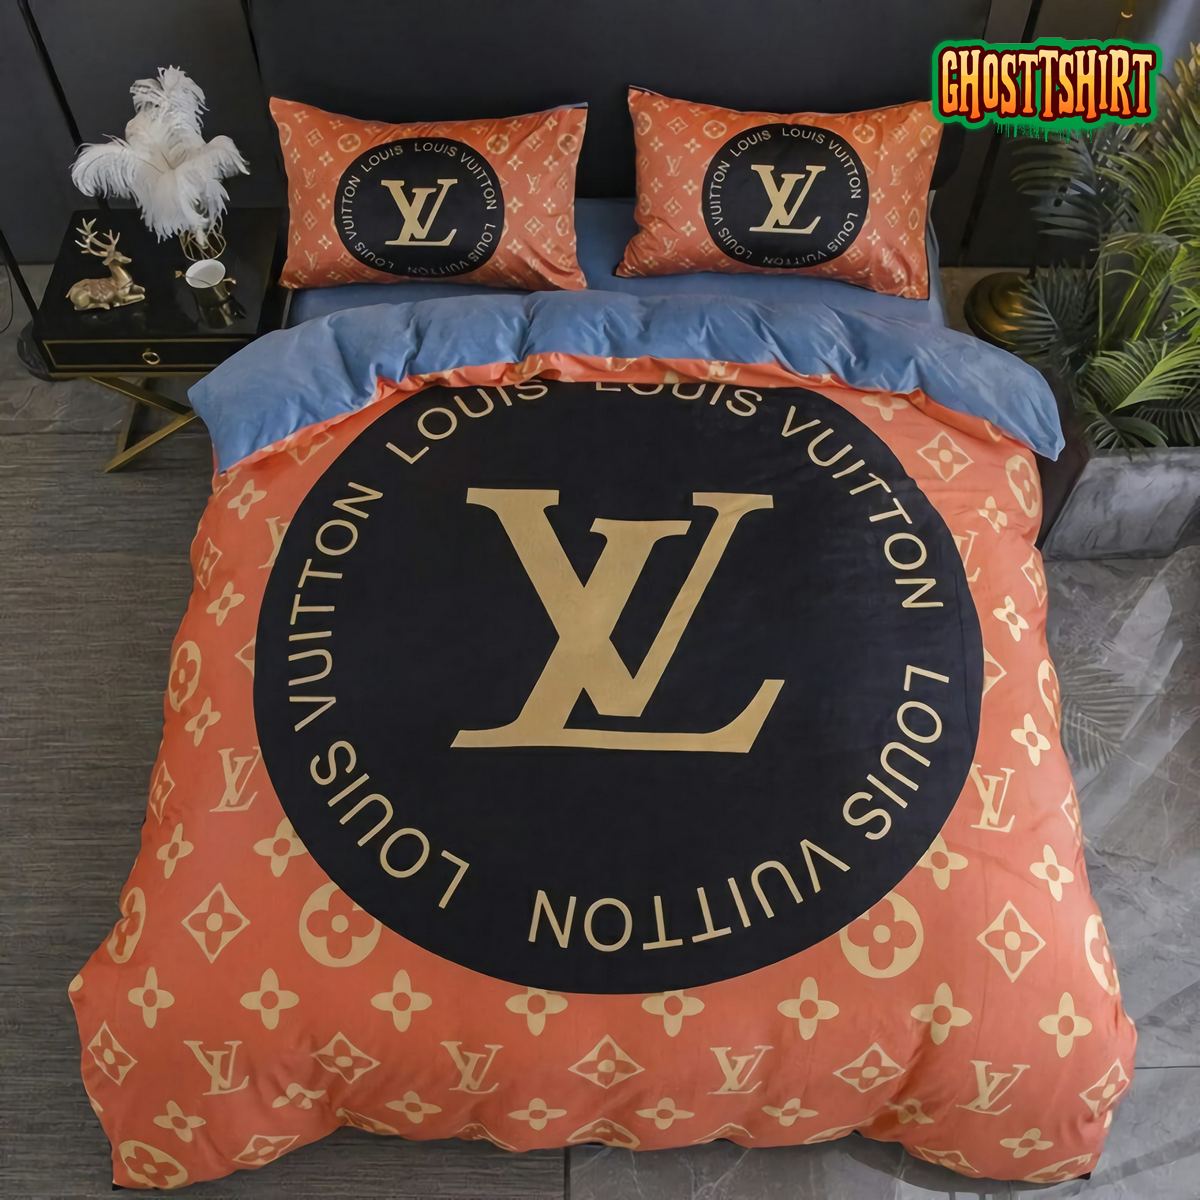 Louis Vuitton Bed Sheets 2 bedsheets 4pillowcases for kingsize bed   Reappcomgh